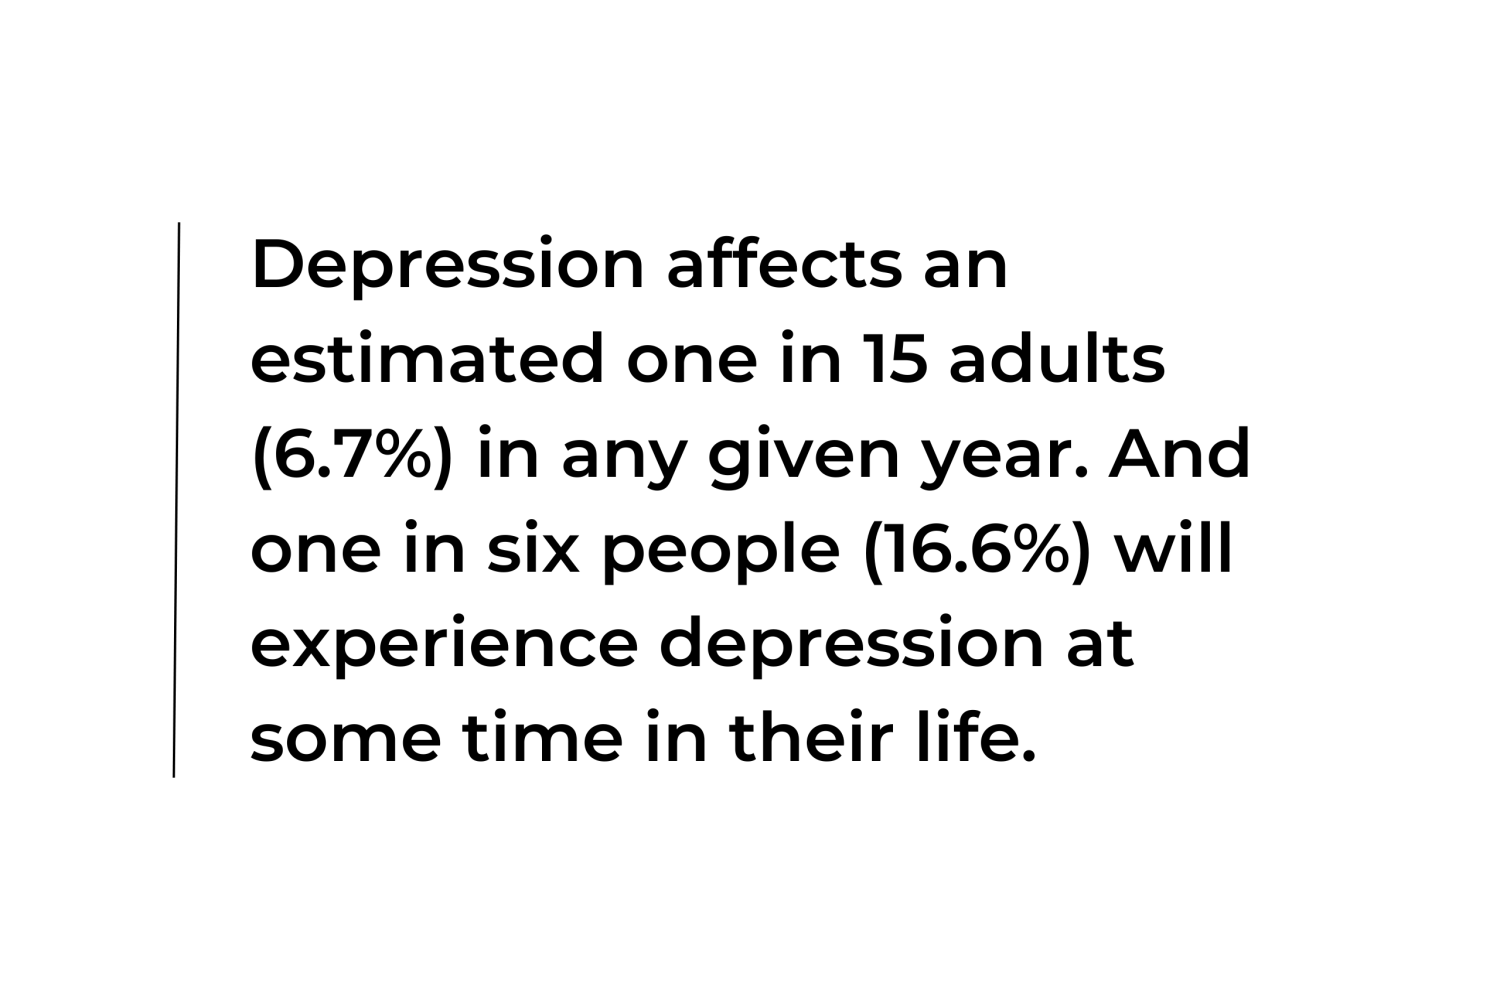 Depression affects an estimated one in 15 adults (6.7%) in any given year. And one in six people (16.6%) will experience depression at some time in their life.